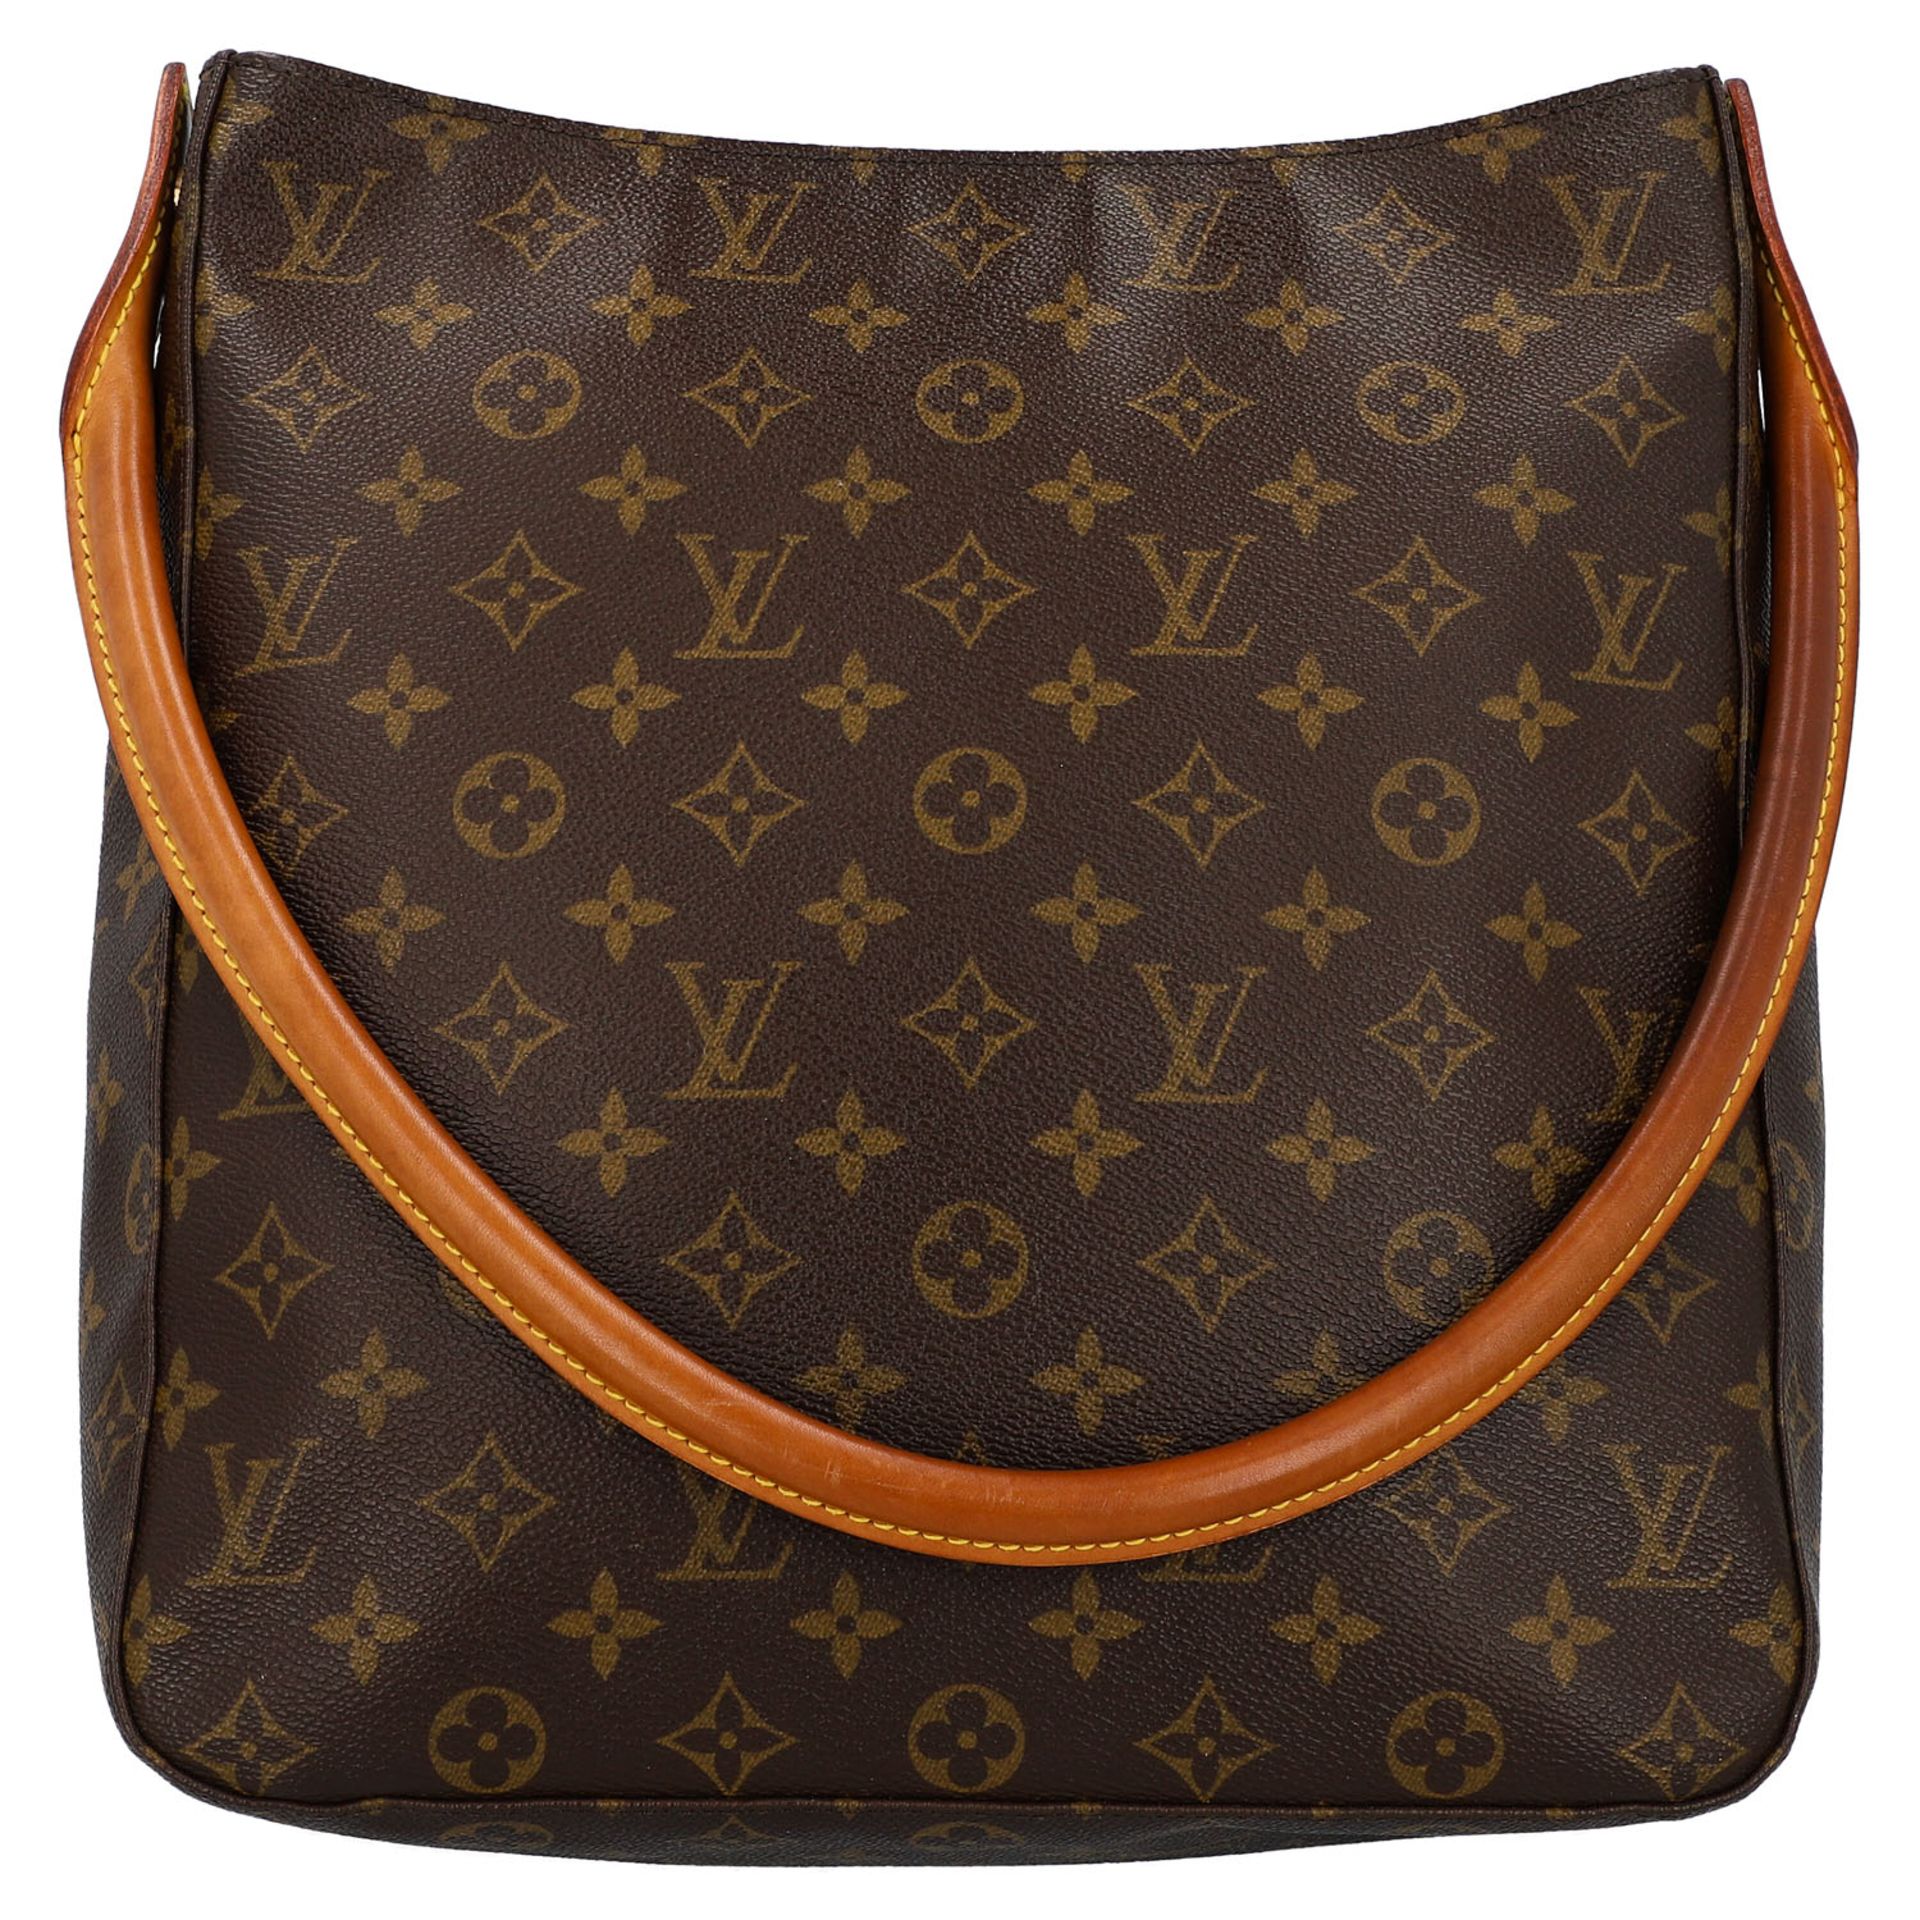 LOUIS VUITTON Schultertasche "LOOPING". - Image 4 of 8